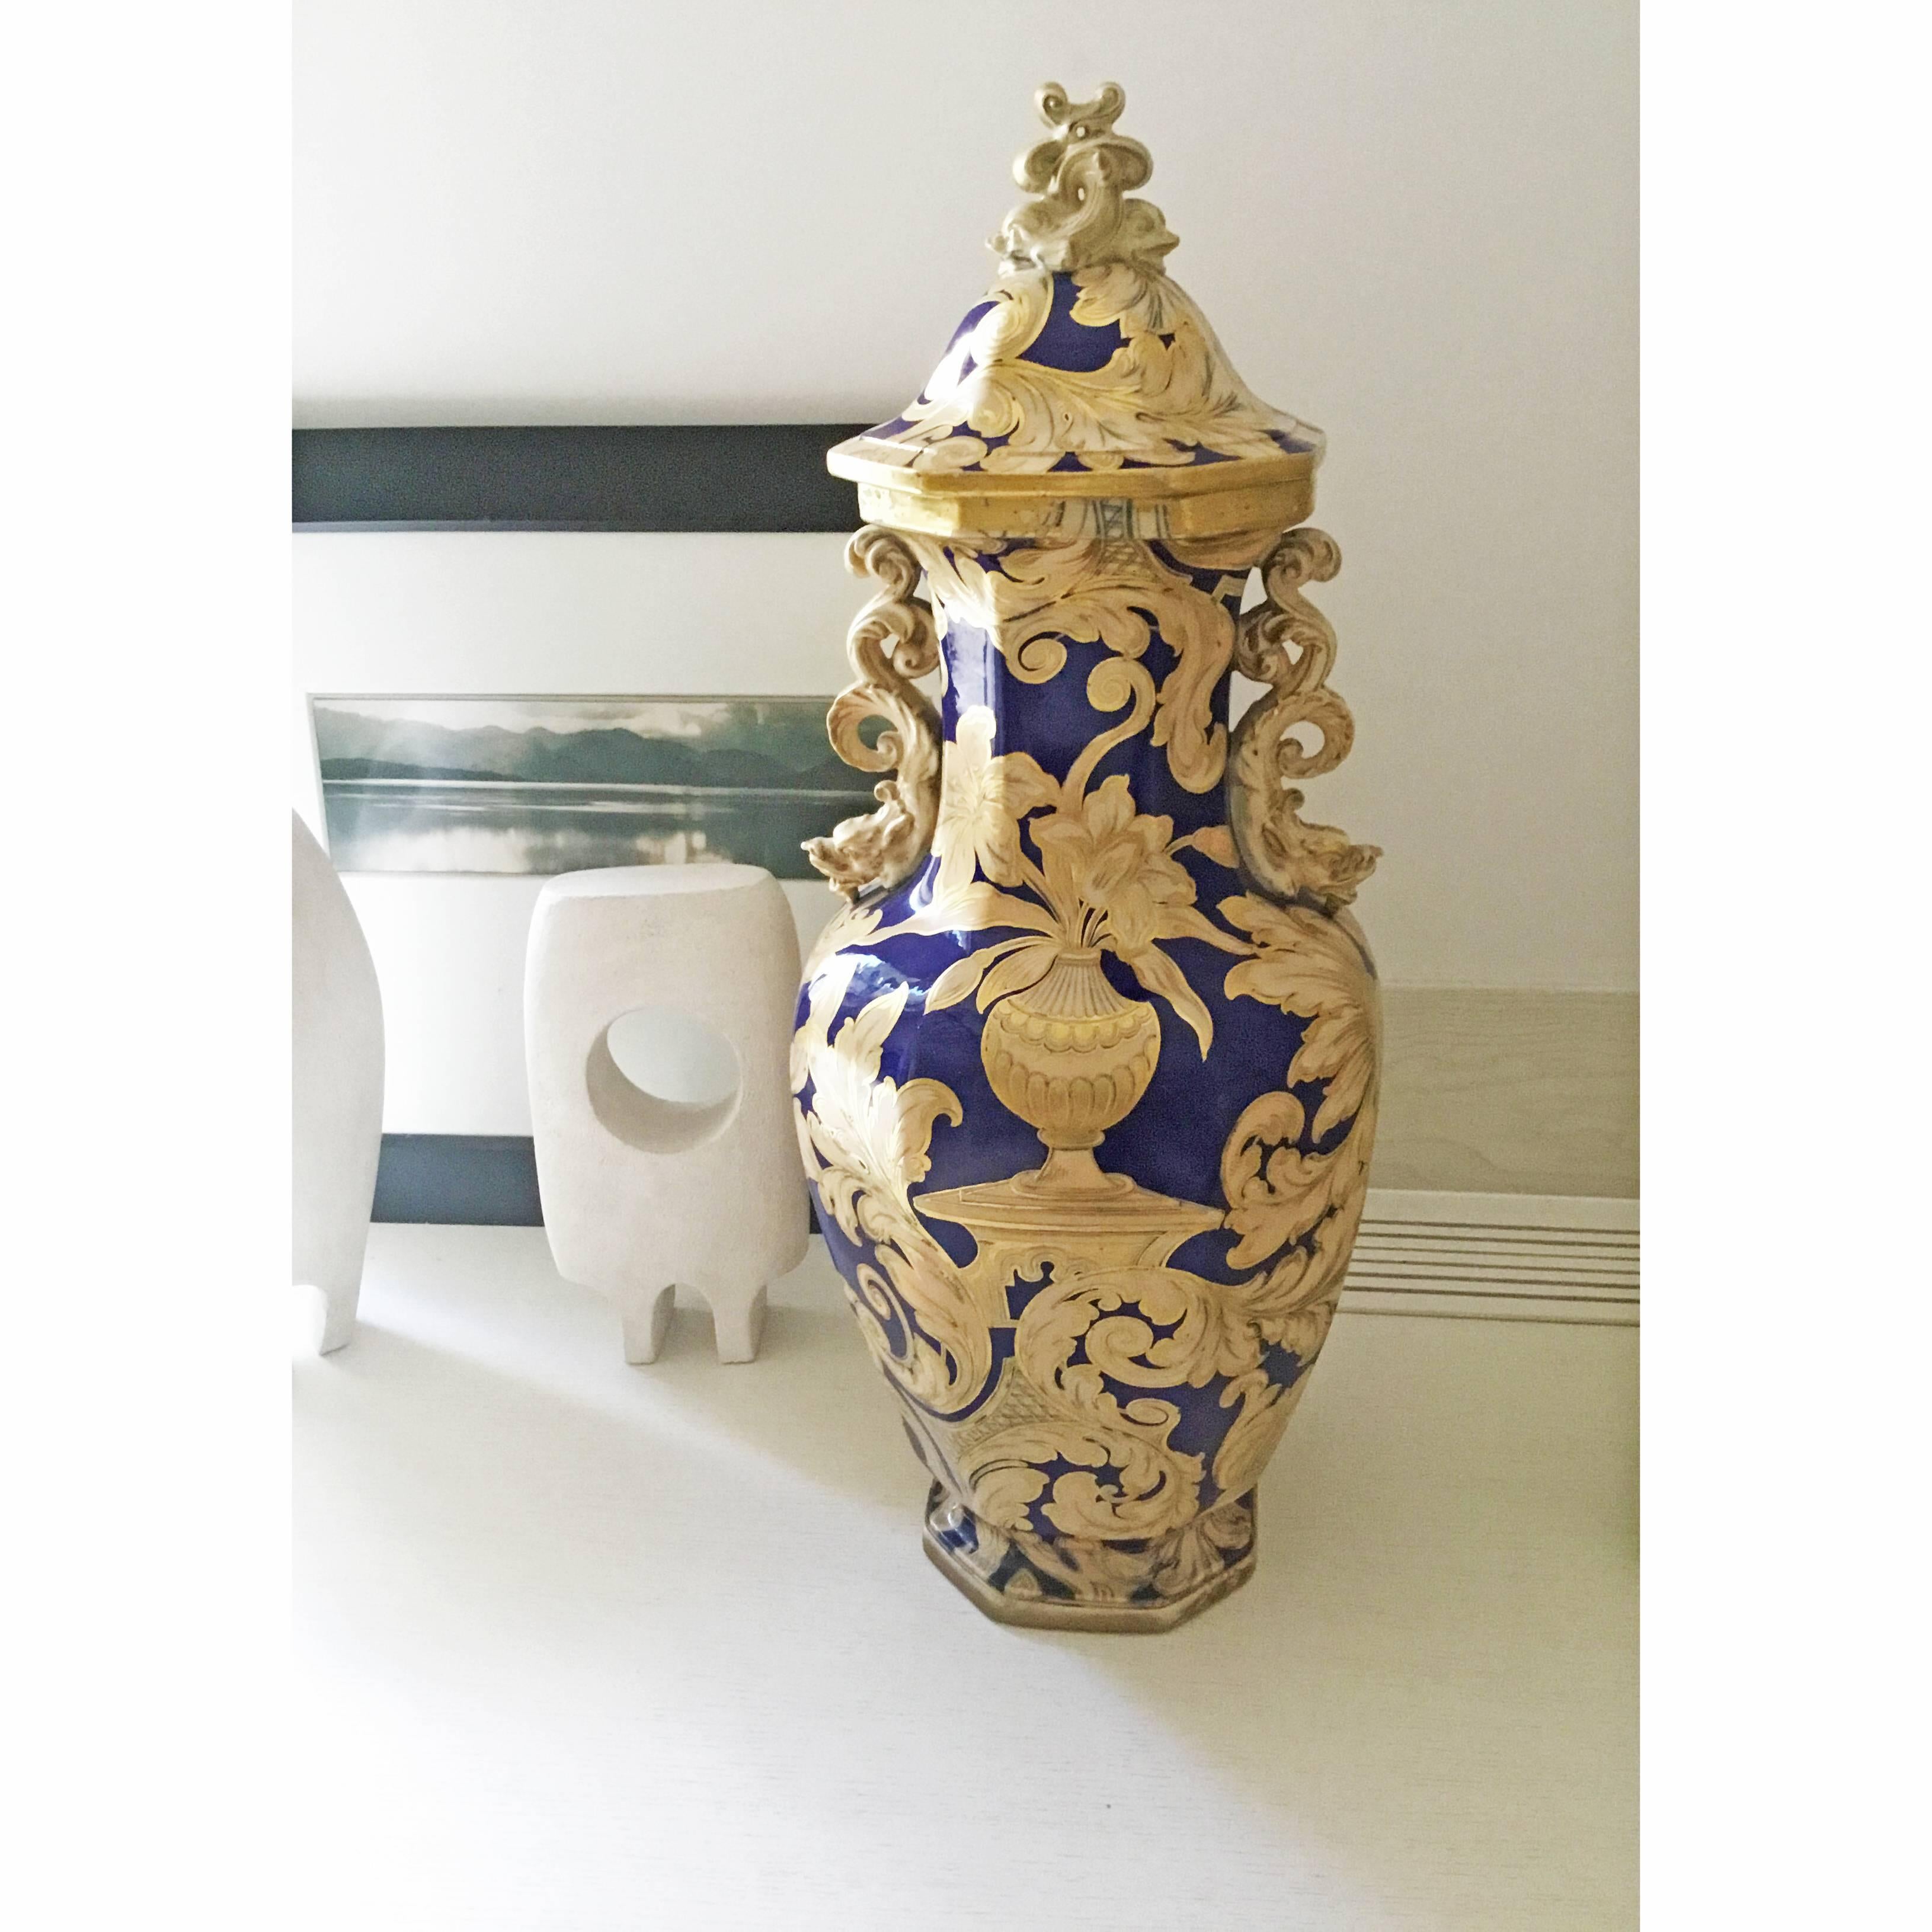 Stunning, highly decorative large oriental style ceramic blue and gold vase, featuring floral motifs with handles and lid. Made in England in 1920's by Spode

63 H x 28 D cm.

Good antique condition.